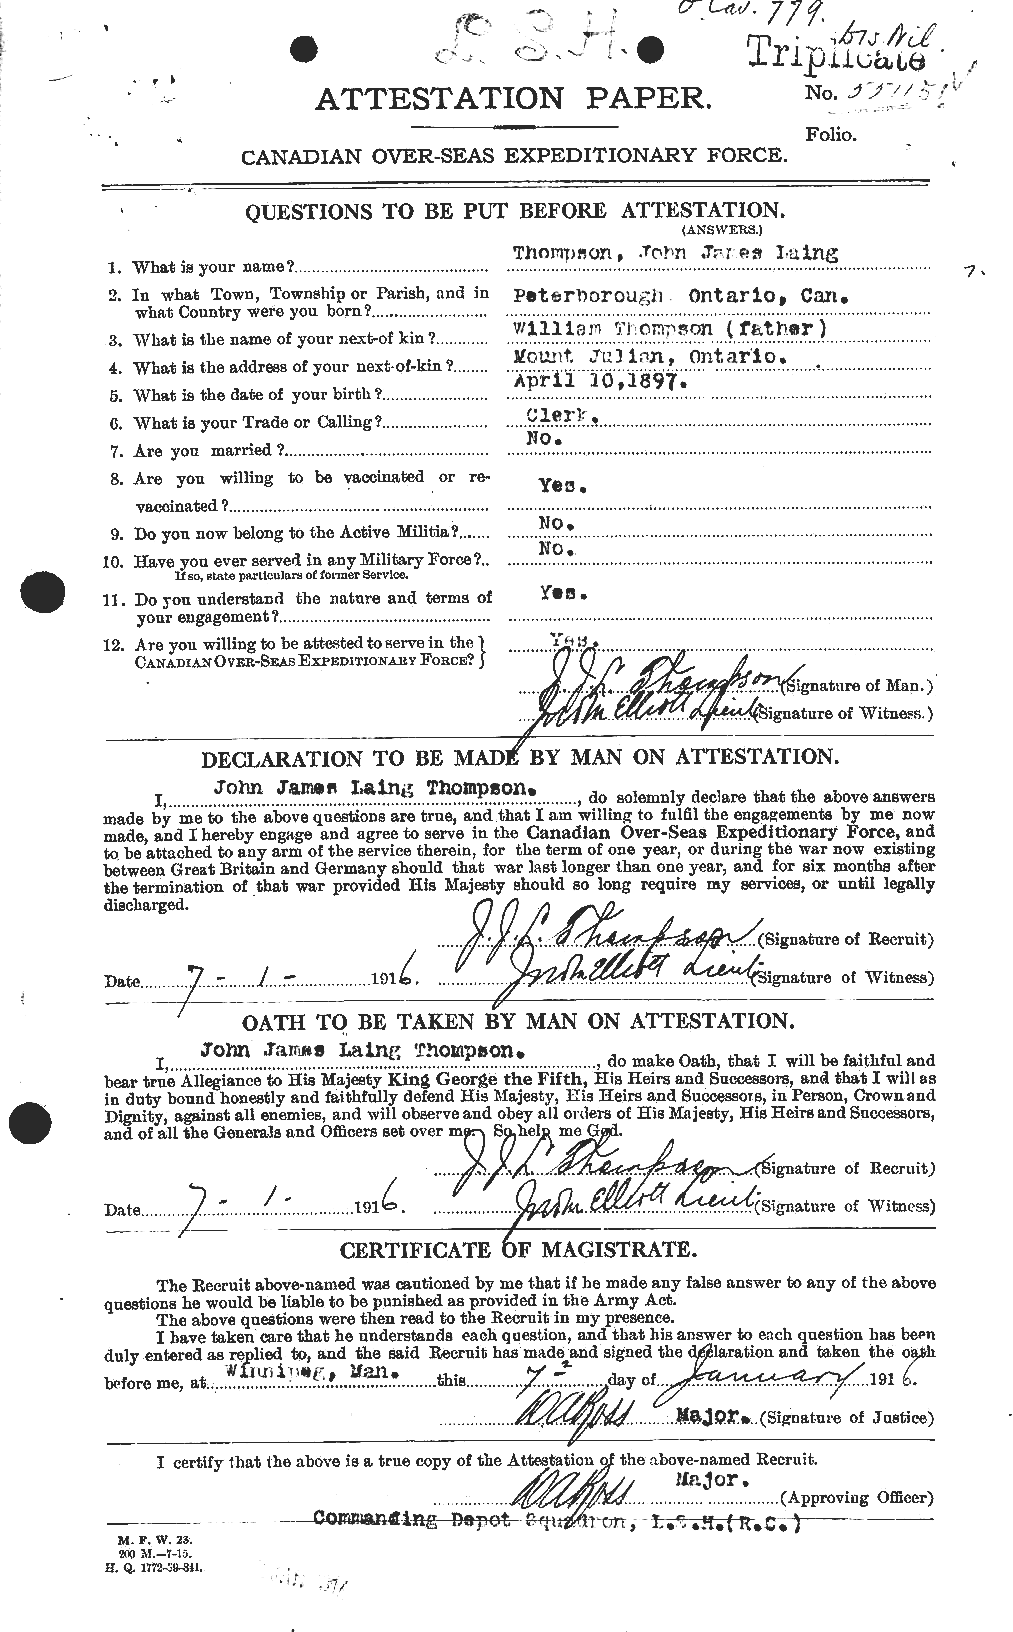 Personnel Records of the First World War - CEF 630591a